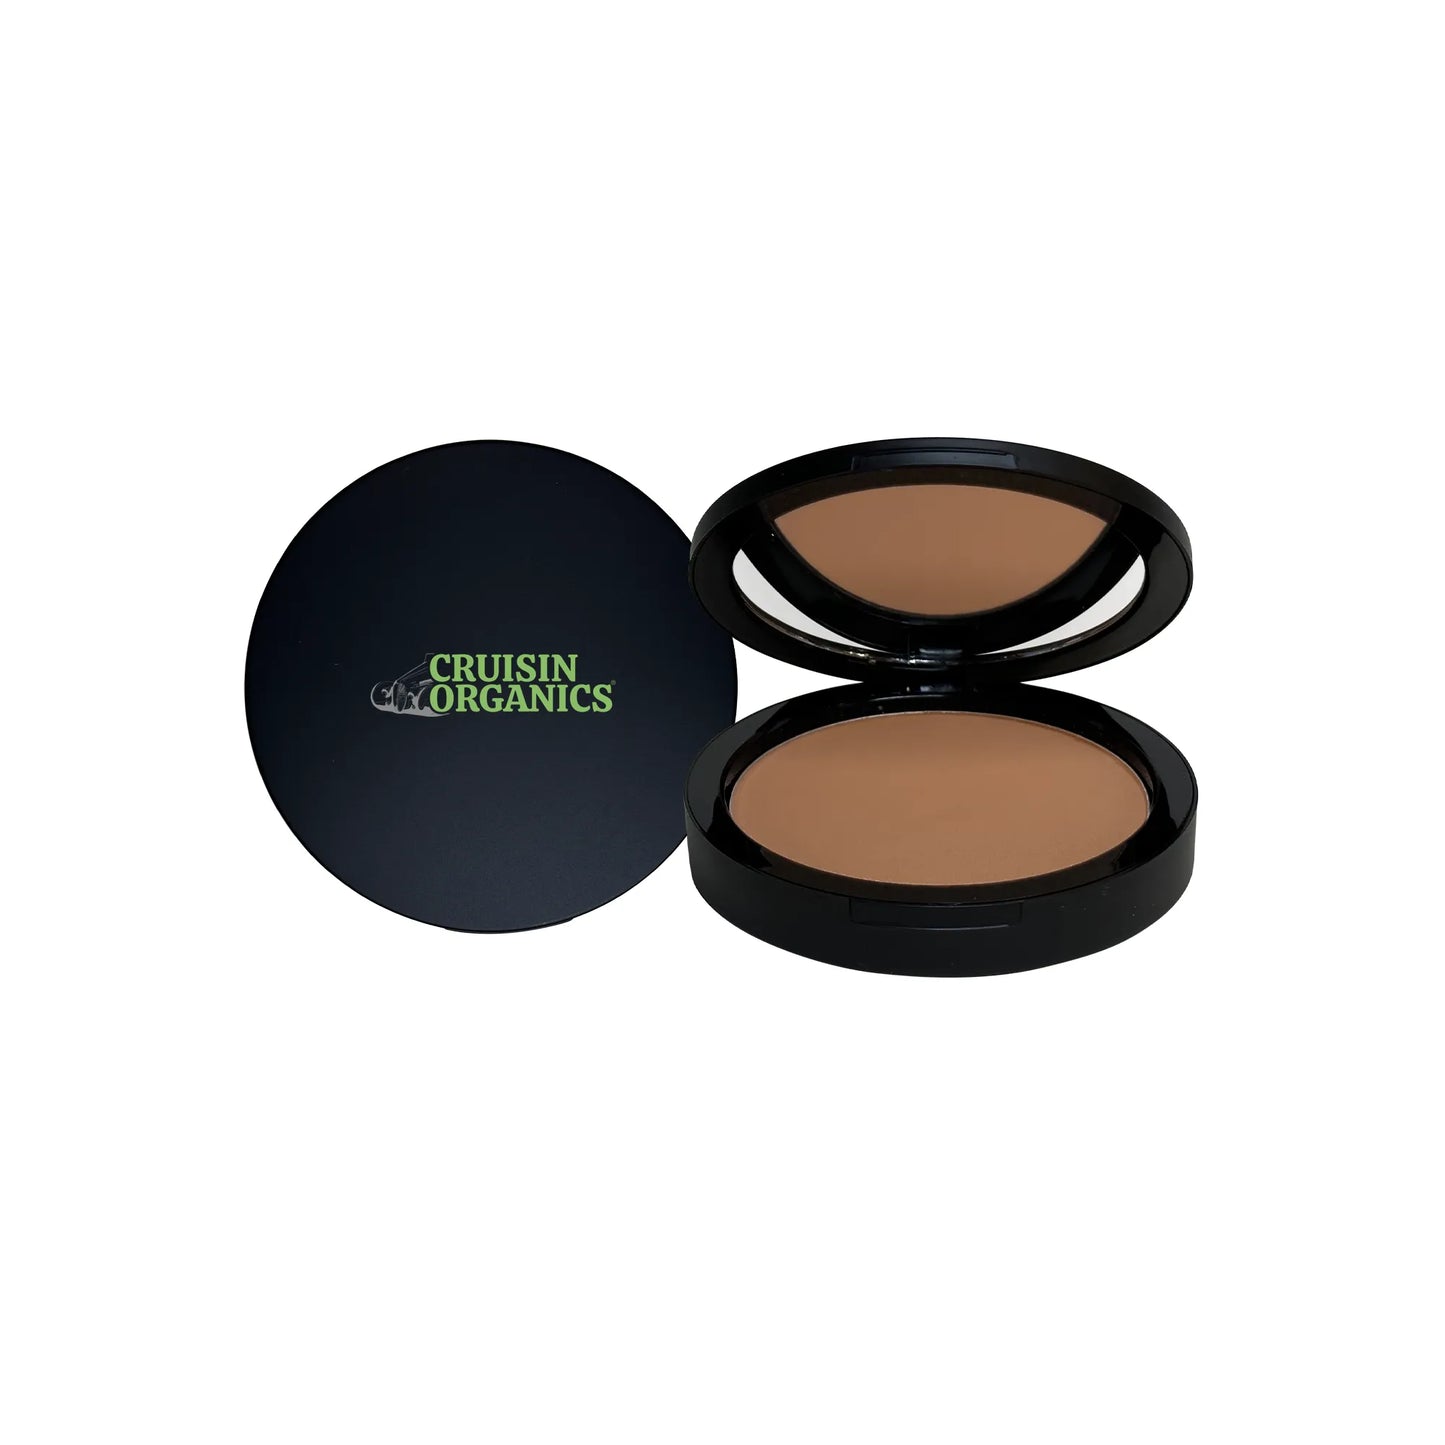 Cruisin Organics dual blend powder foundation with stopping powder show-quality finishes.